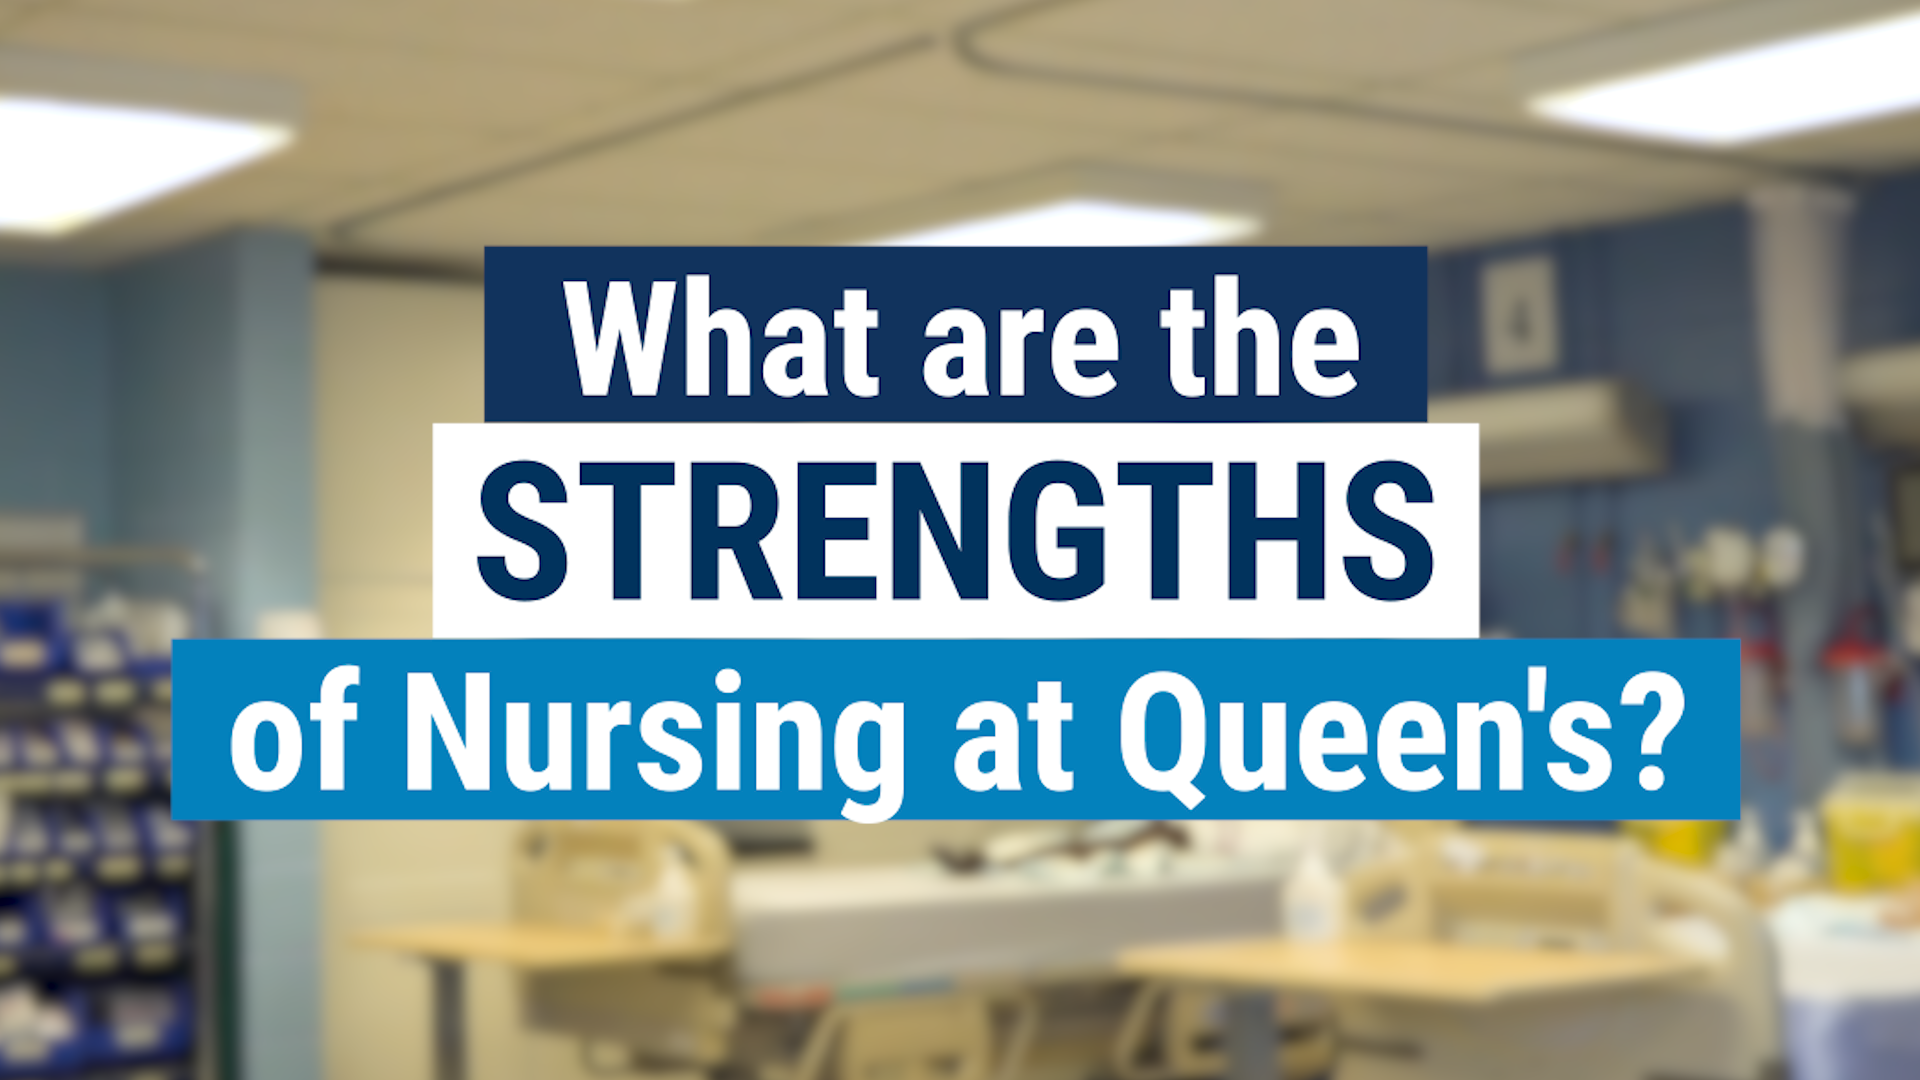 What are the strengths of Nursing at Queen's?